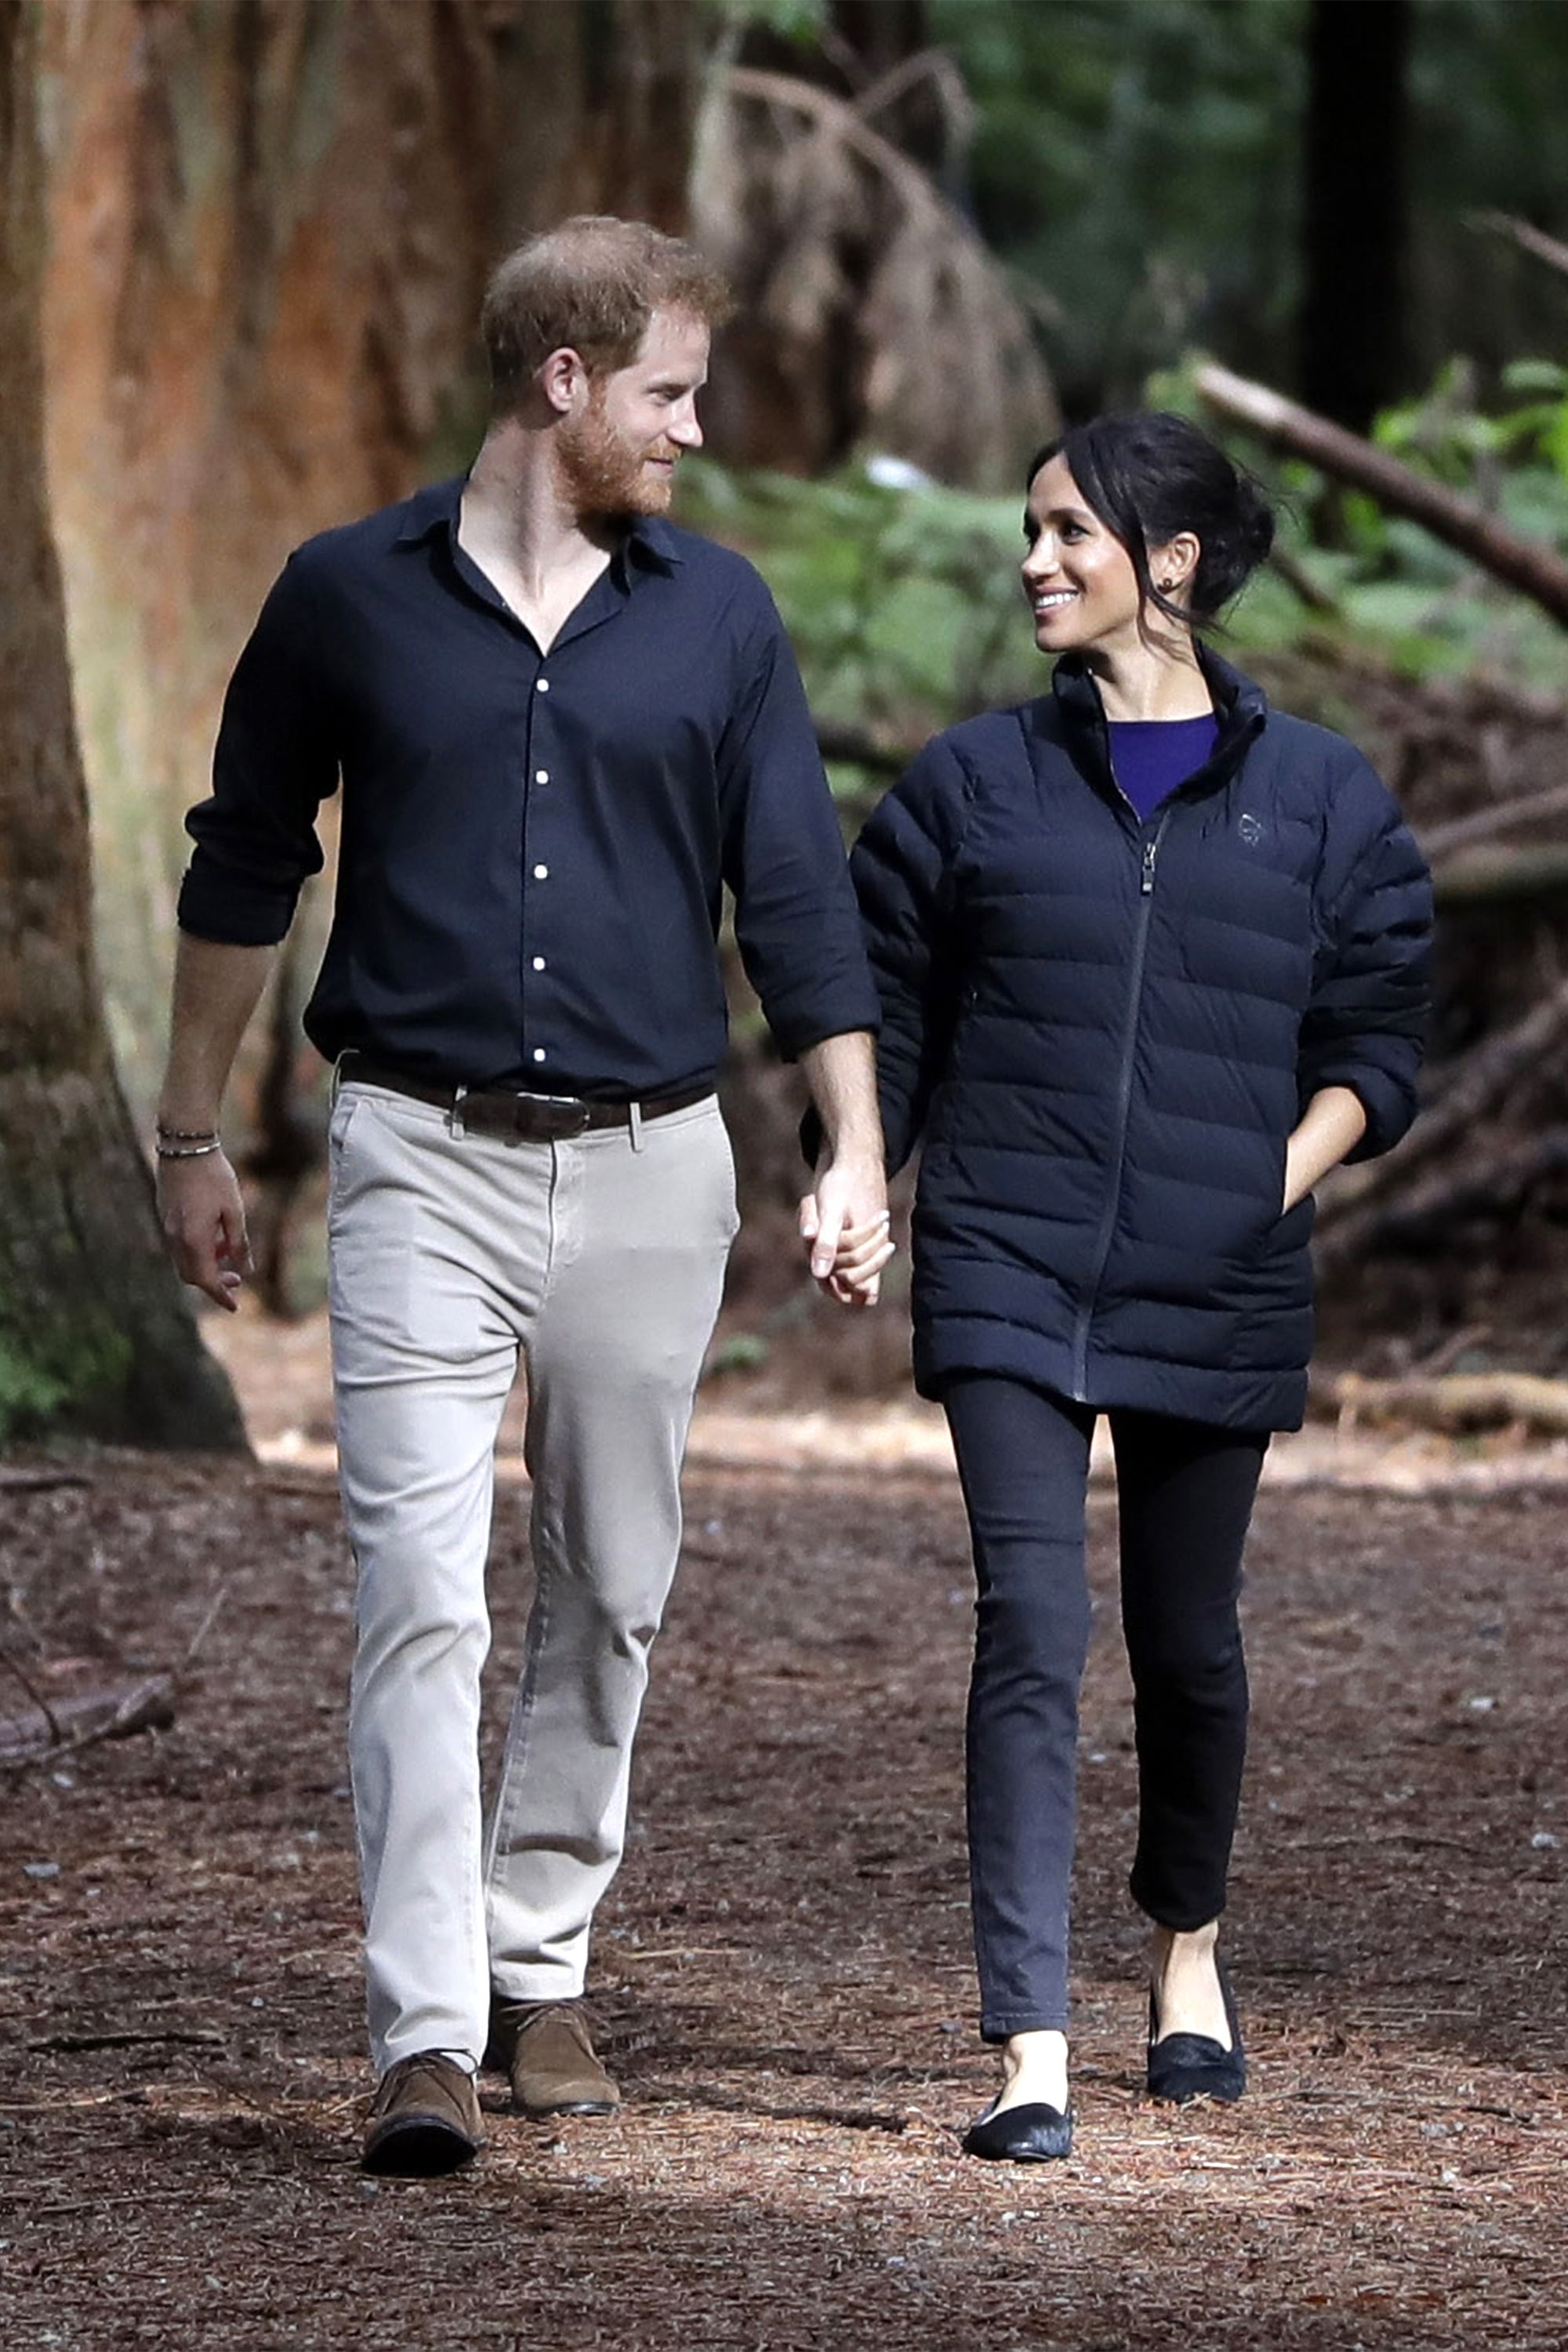 https://hips.hearstapps.com/hmg-prod.s3.amazonaws.com/images/hbz-prince-harry-meghan-markle-cute-moments-2018-10-gettyimages-1055648010.jpg?crop=1xw:1xh;center,top